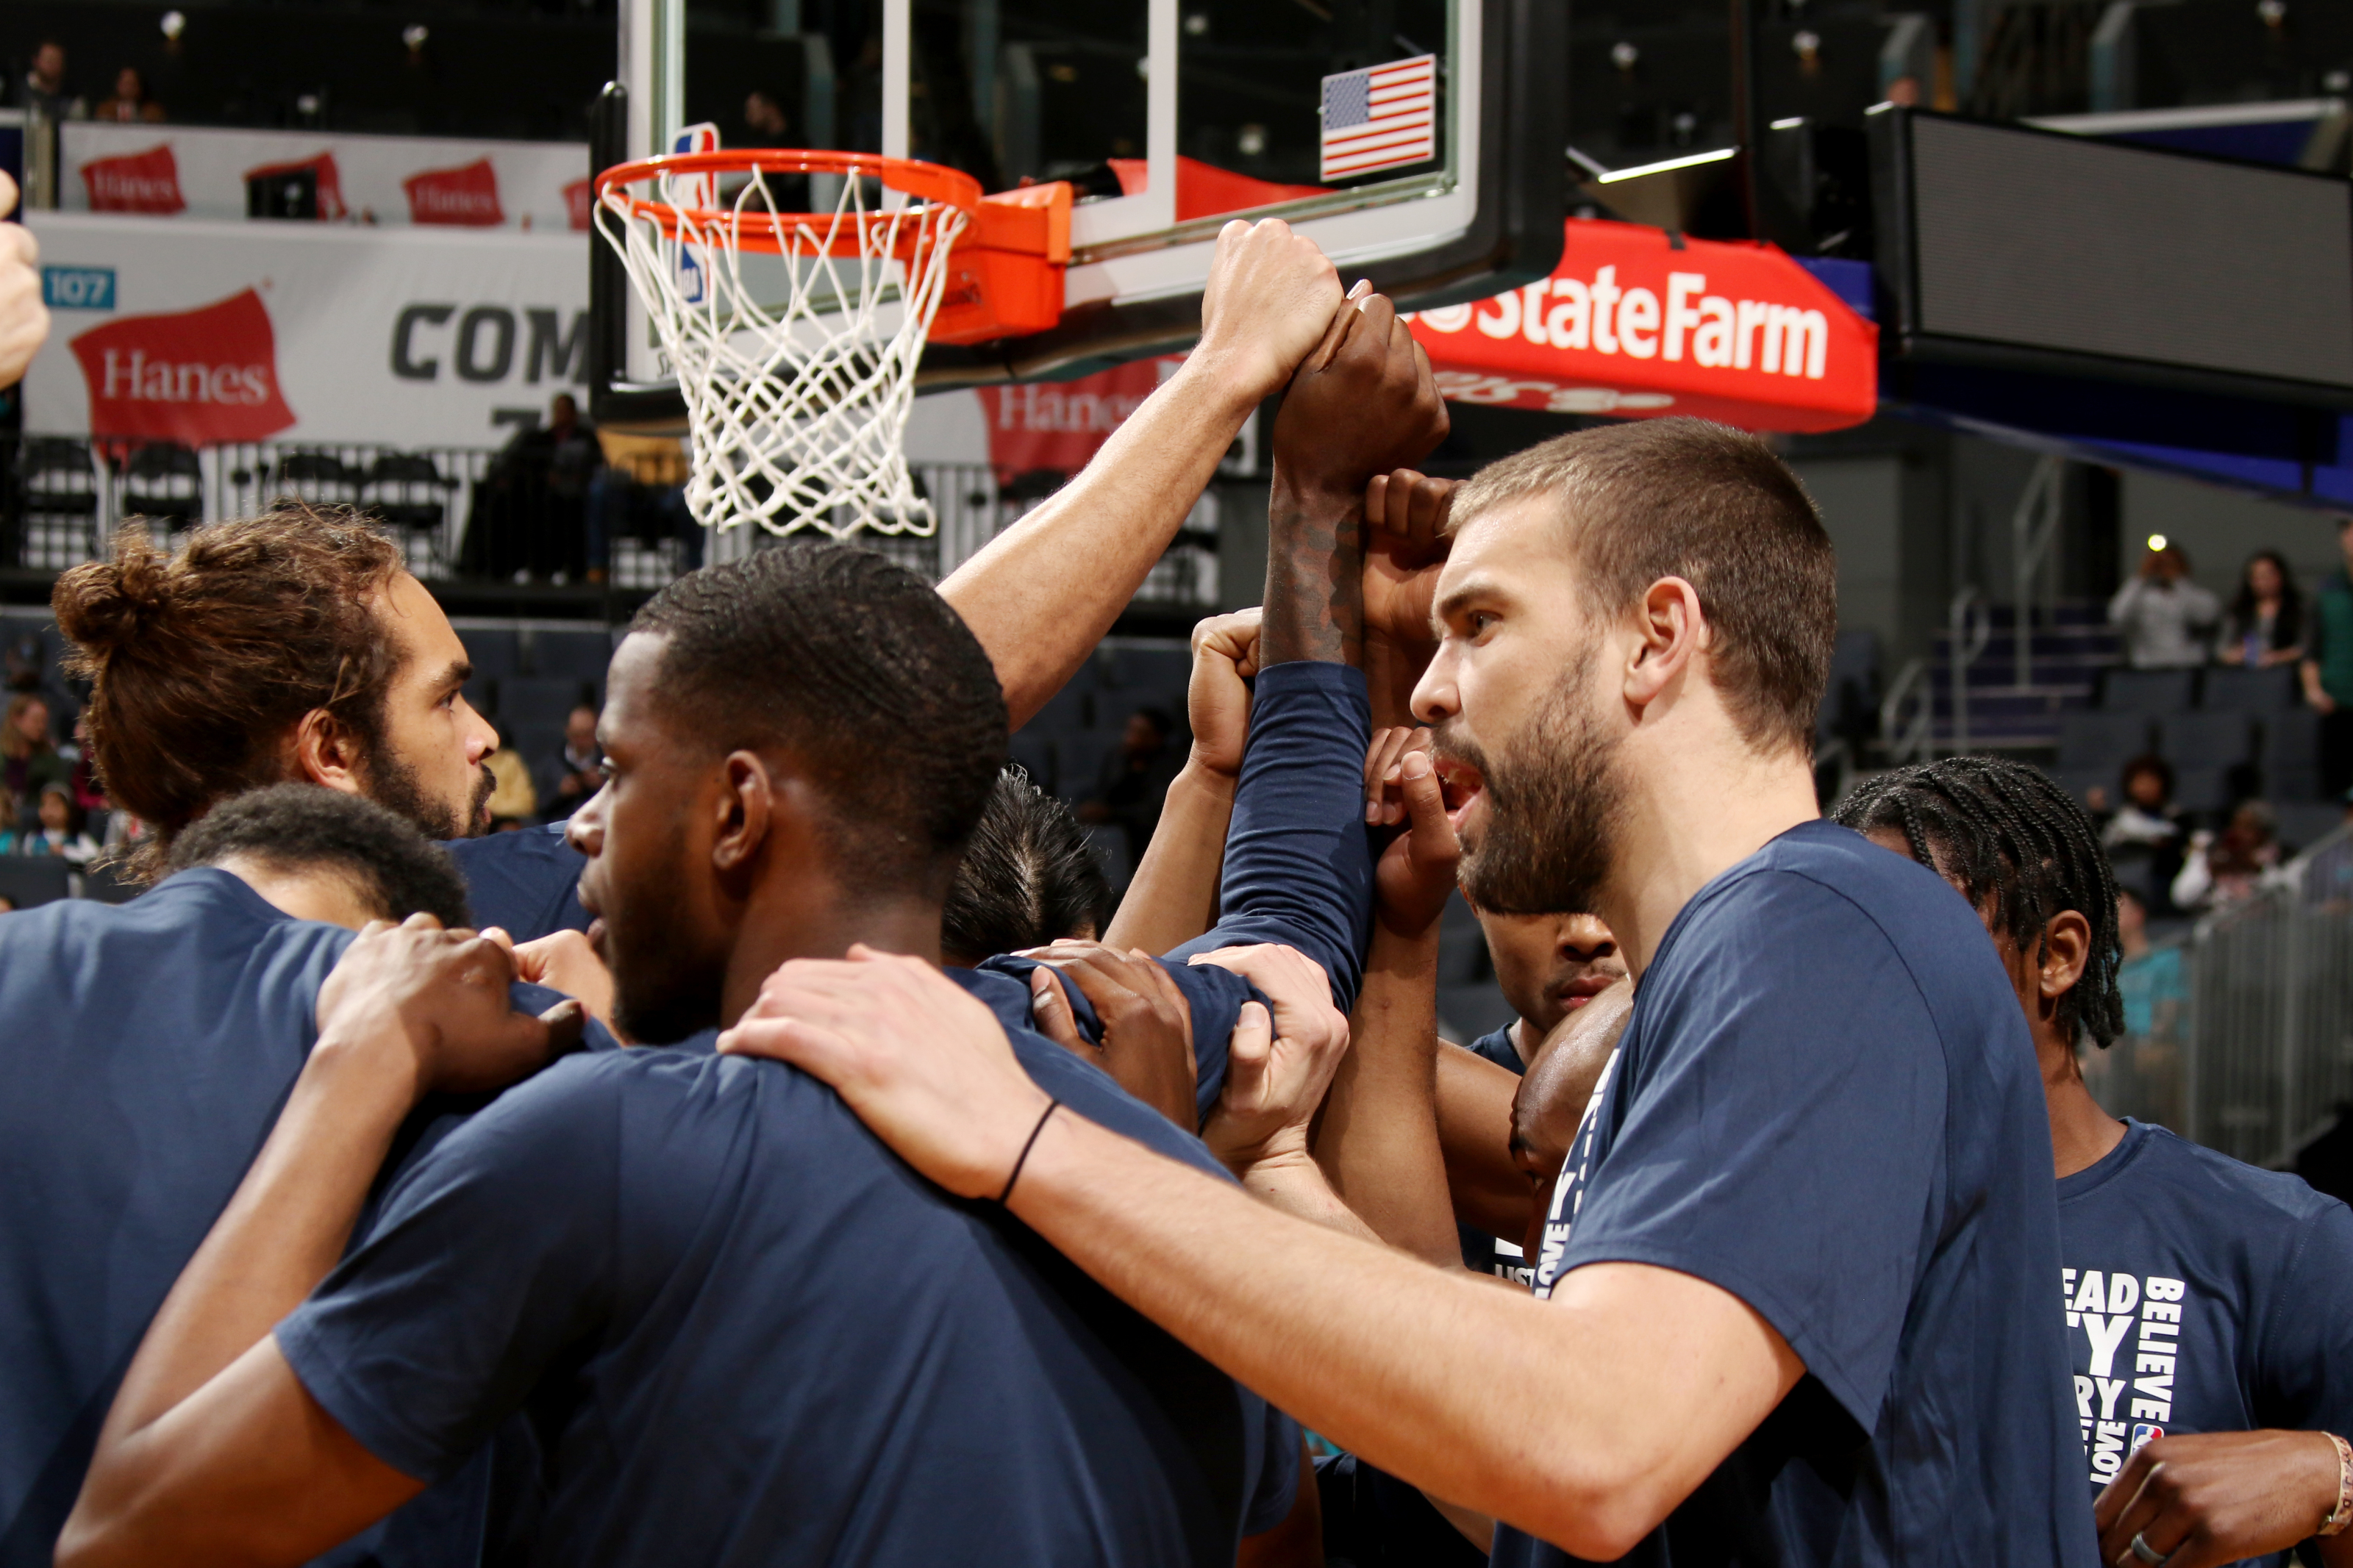 The New York Knicks huddle up during the game against the News Photo -  Getty Images